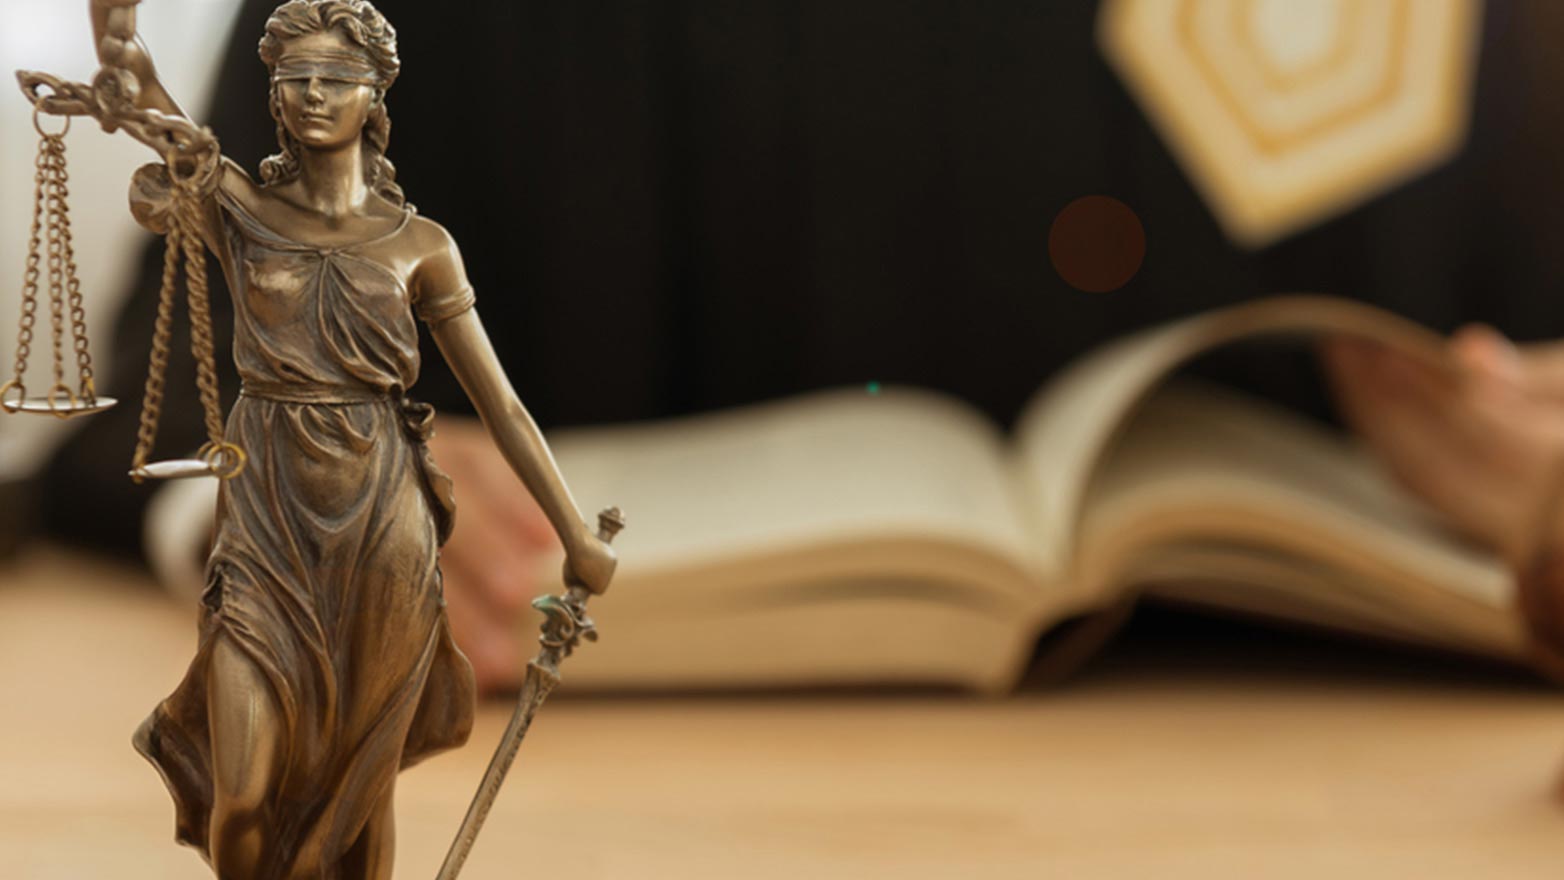 scales of justice figurine on a desk, legal book in background